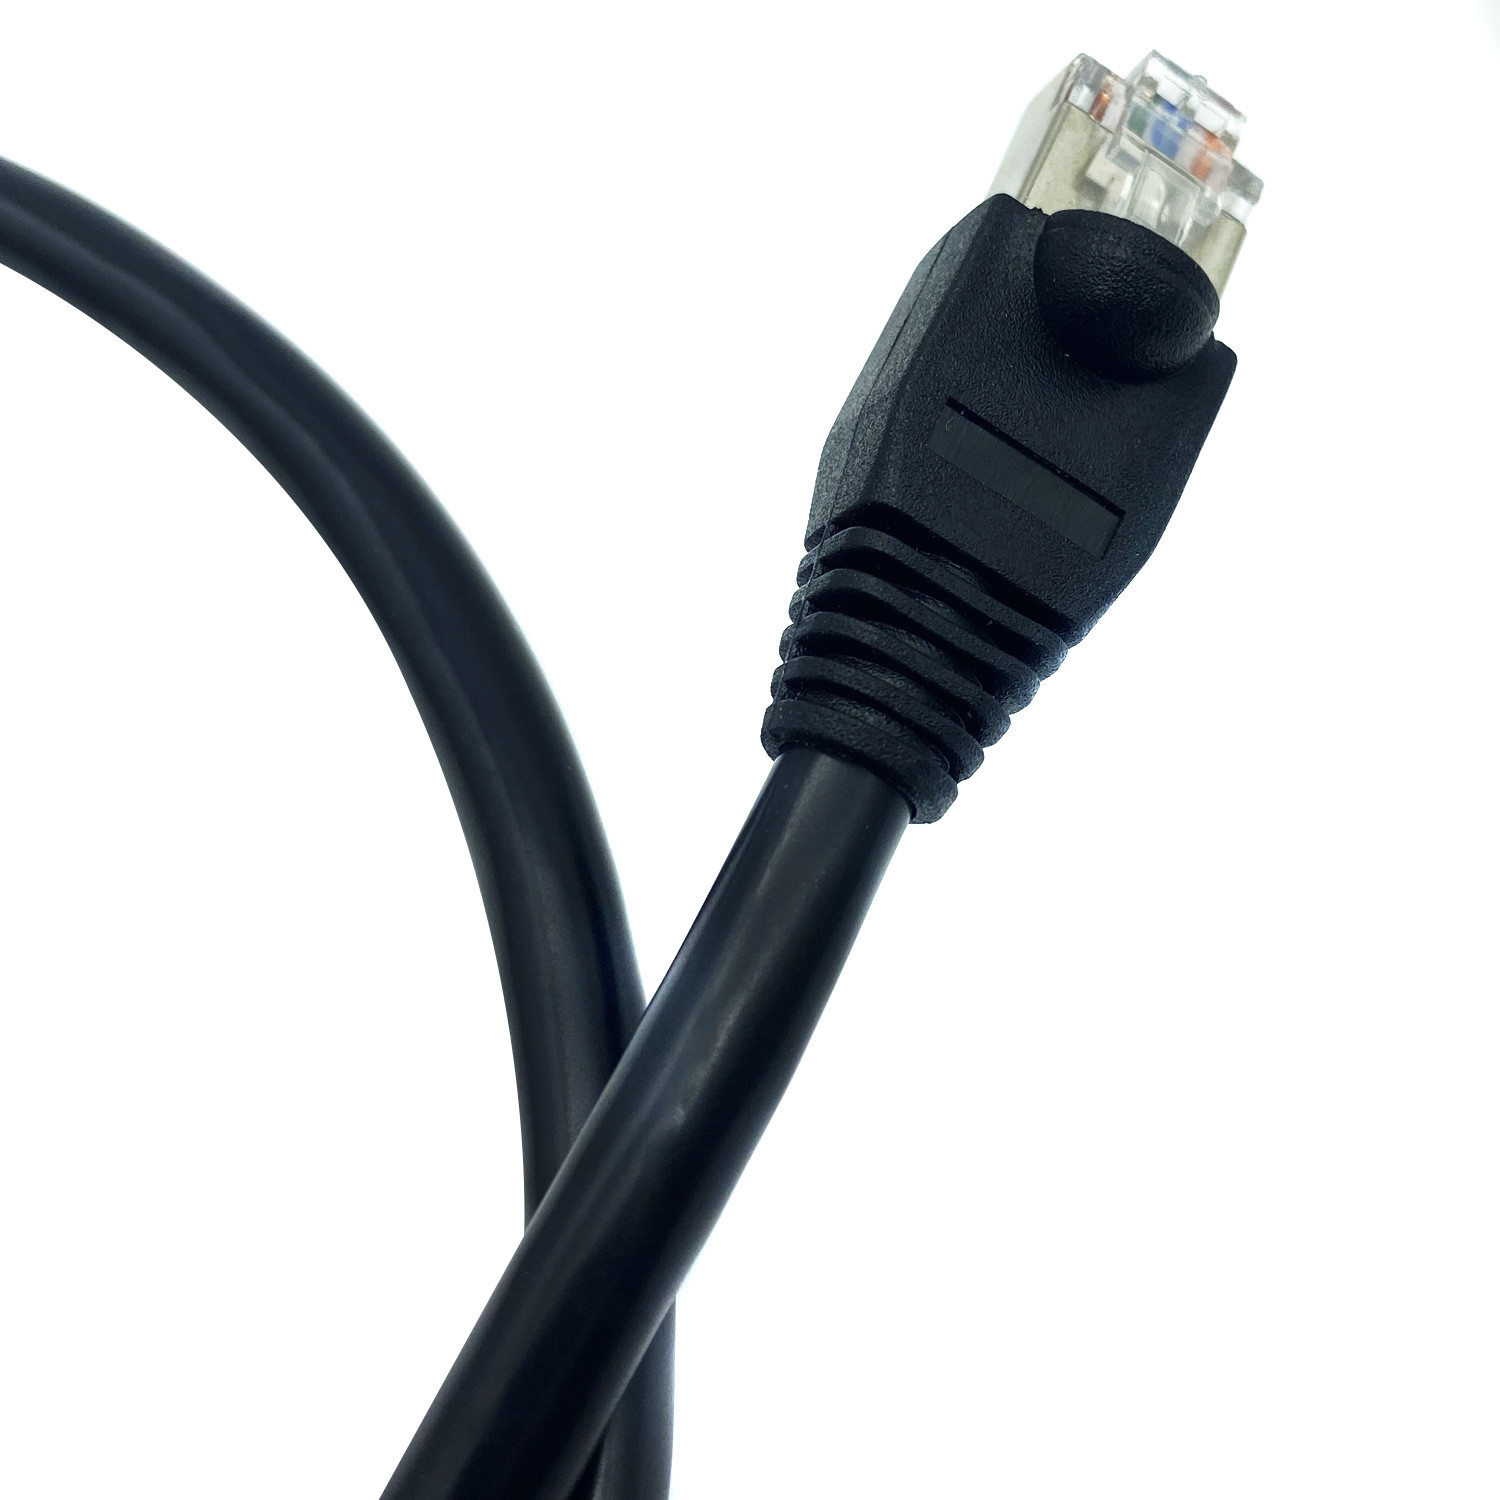 China Customized CAT5e Network Cable , FTP RJ45 Lan Cable Assembly factory